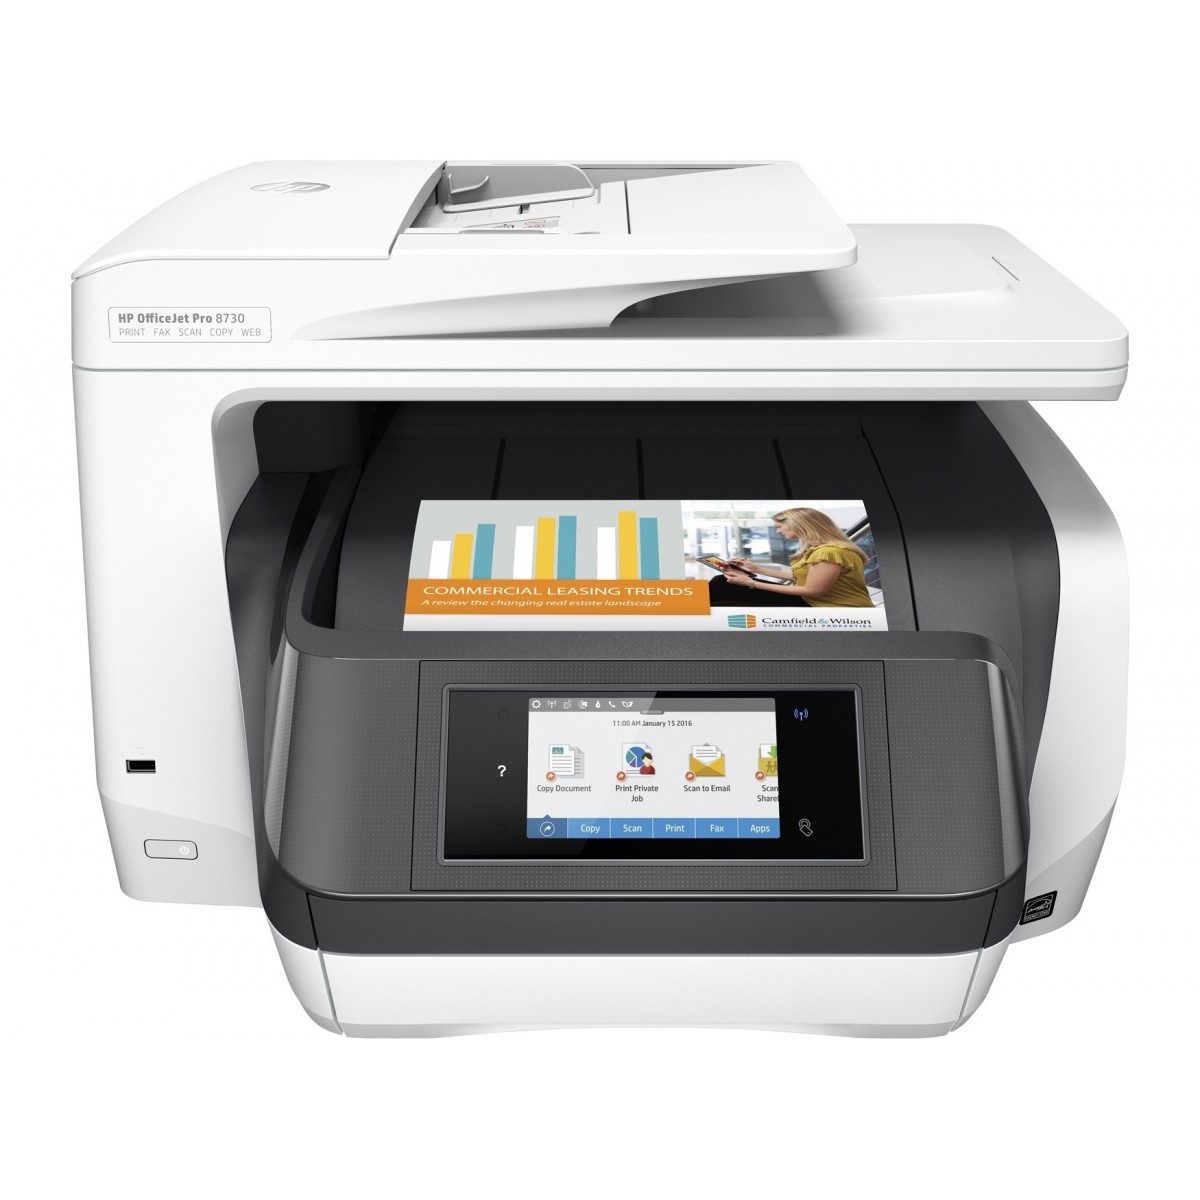 HP OfficeJet Pro 8730 - Thermal inkjet - Colour printing - 2400 x 1200 DPI - A4 - Direct printing - Grey